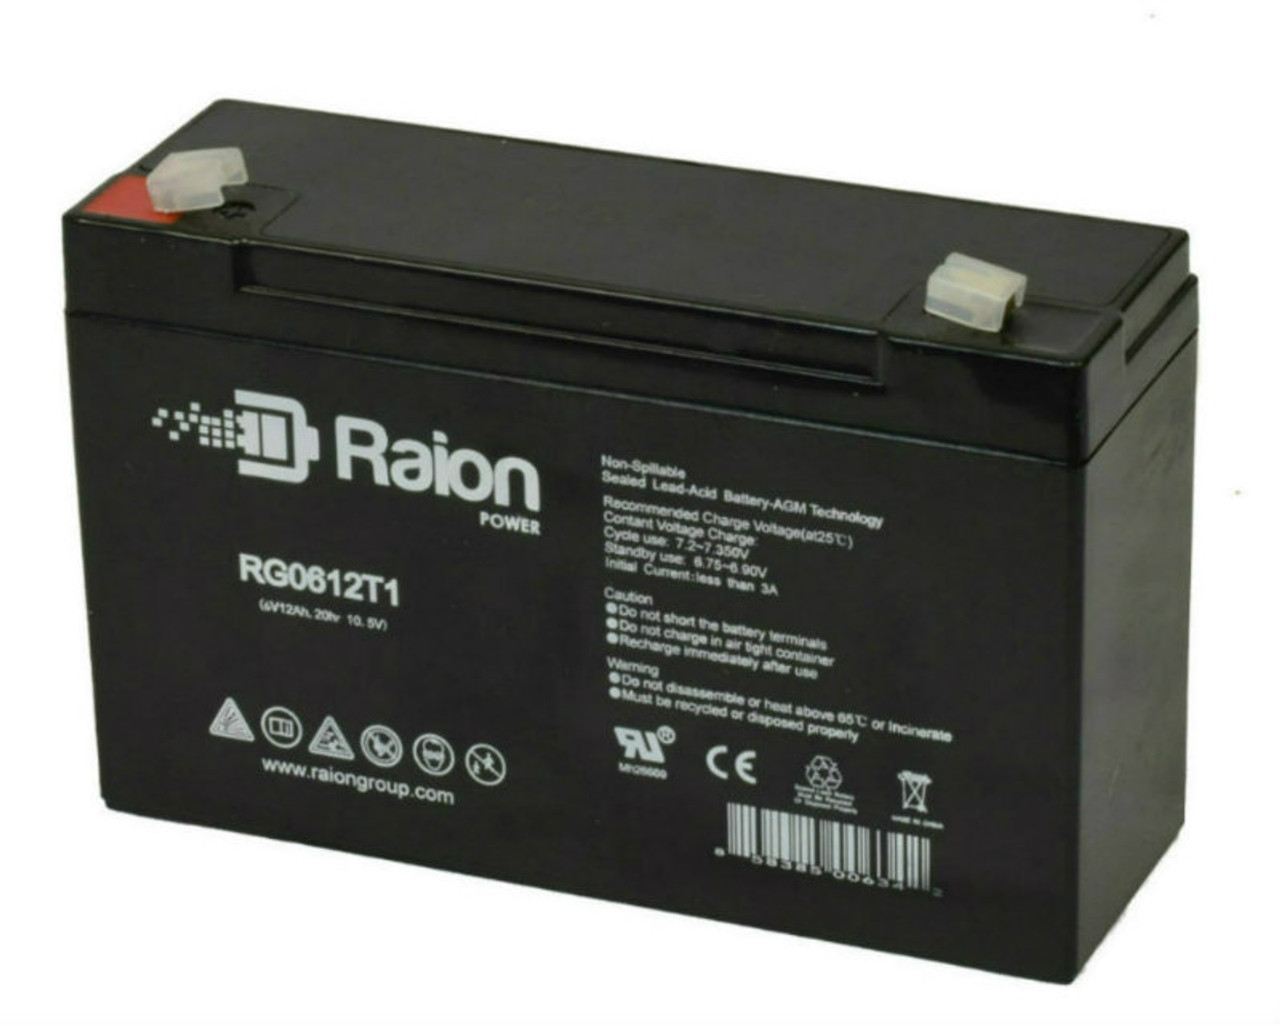 Raion Power RG06120T1 Replacement 6V 12Ah Emergency Light Battery for Holophane EH10